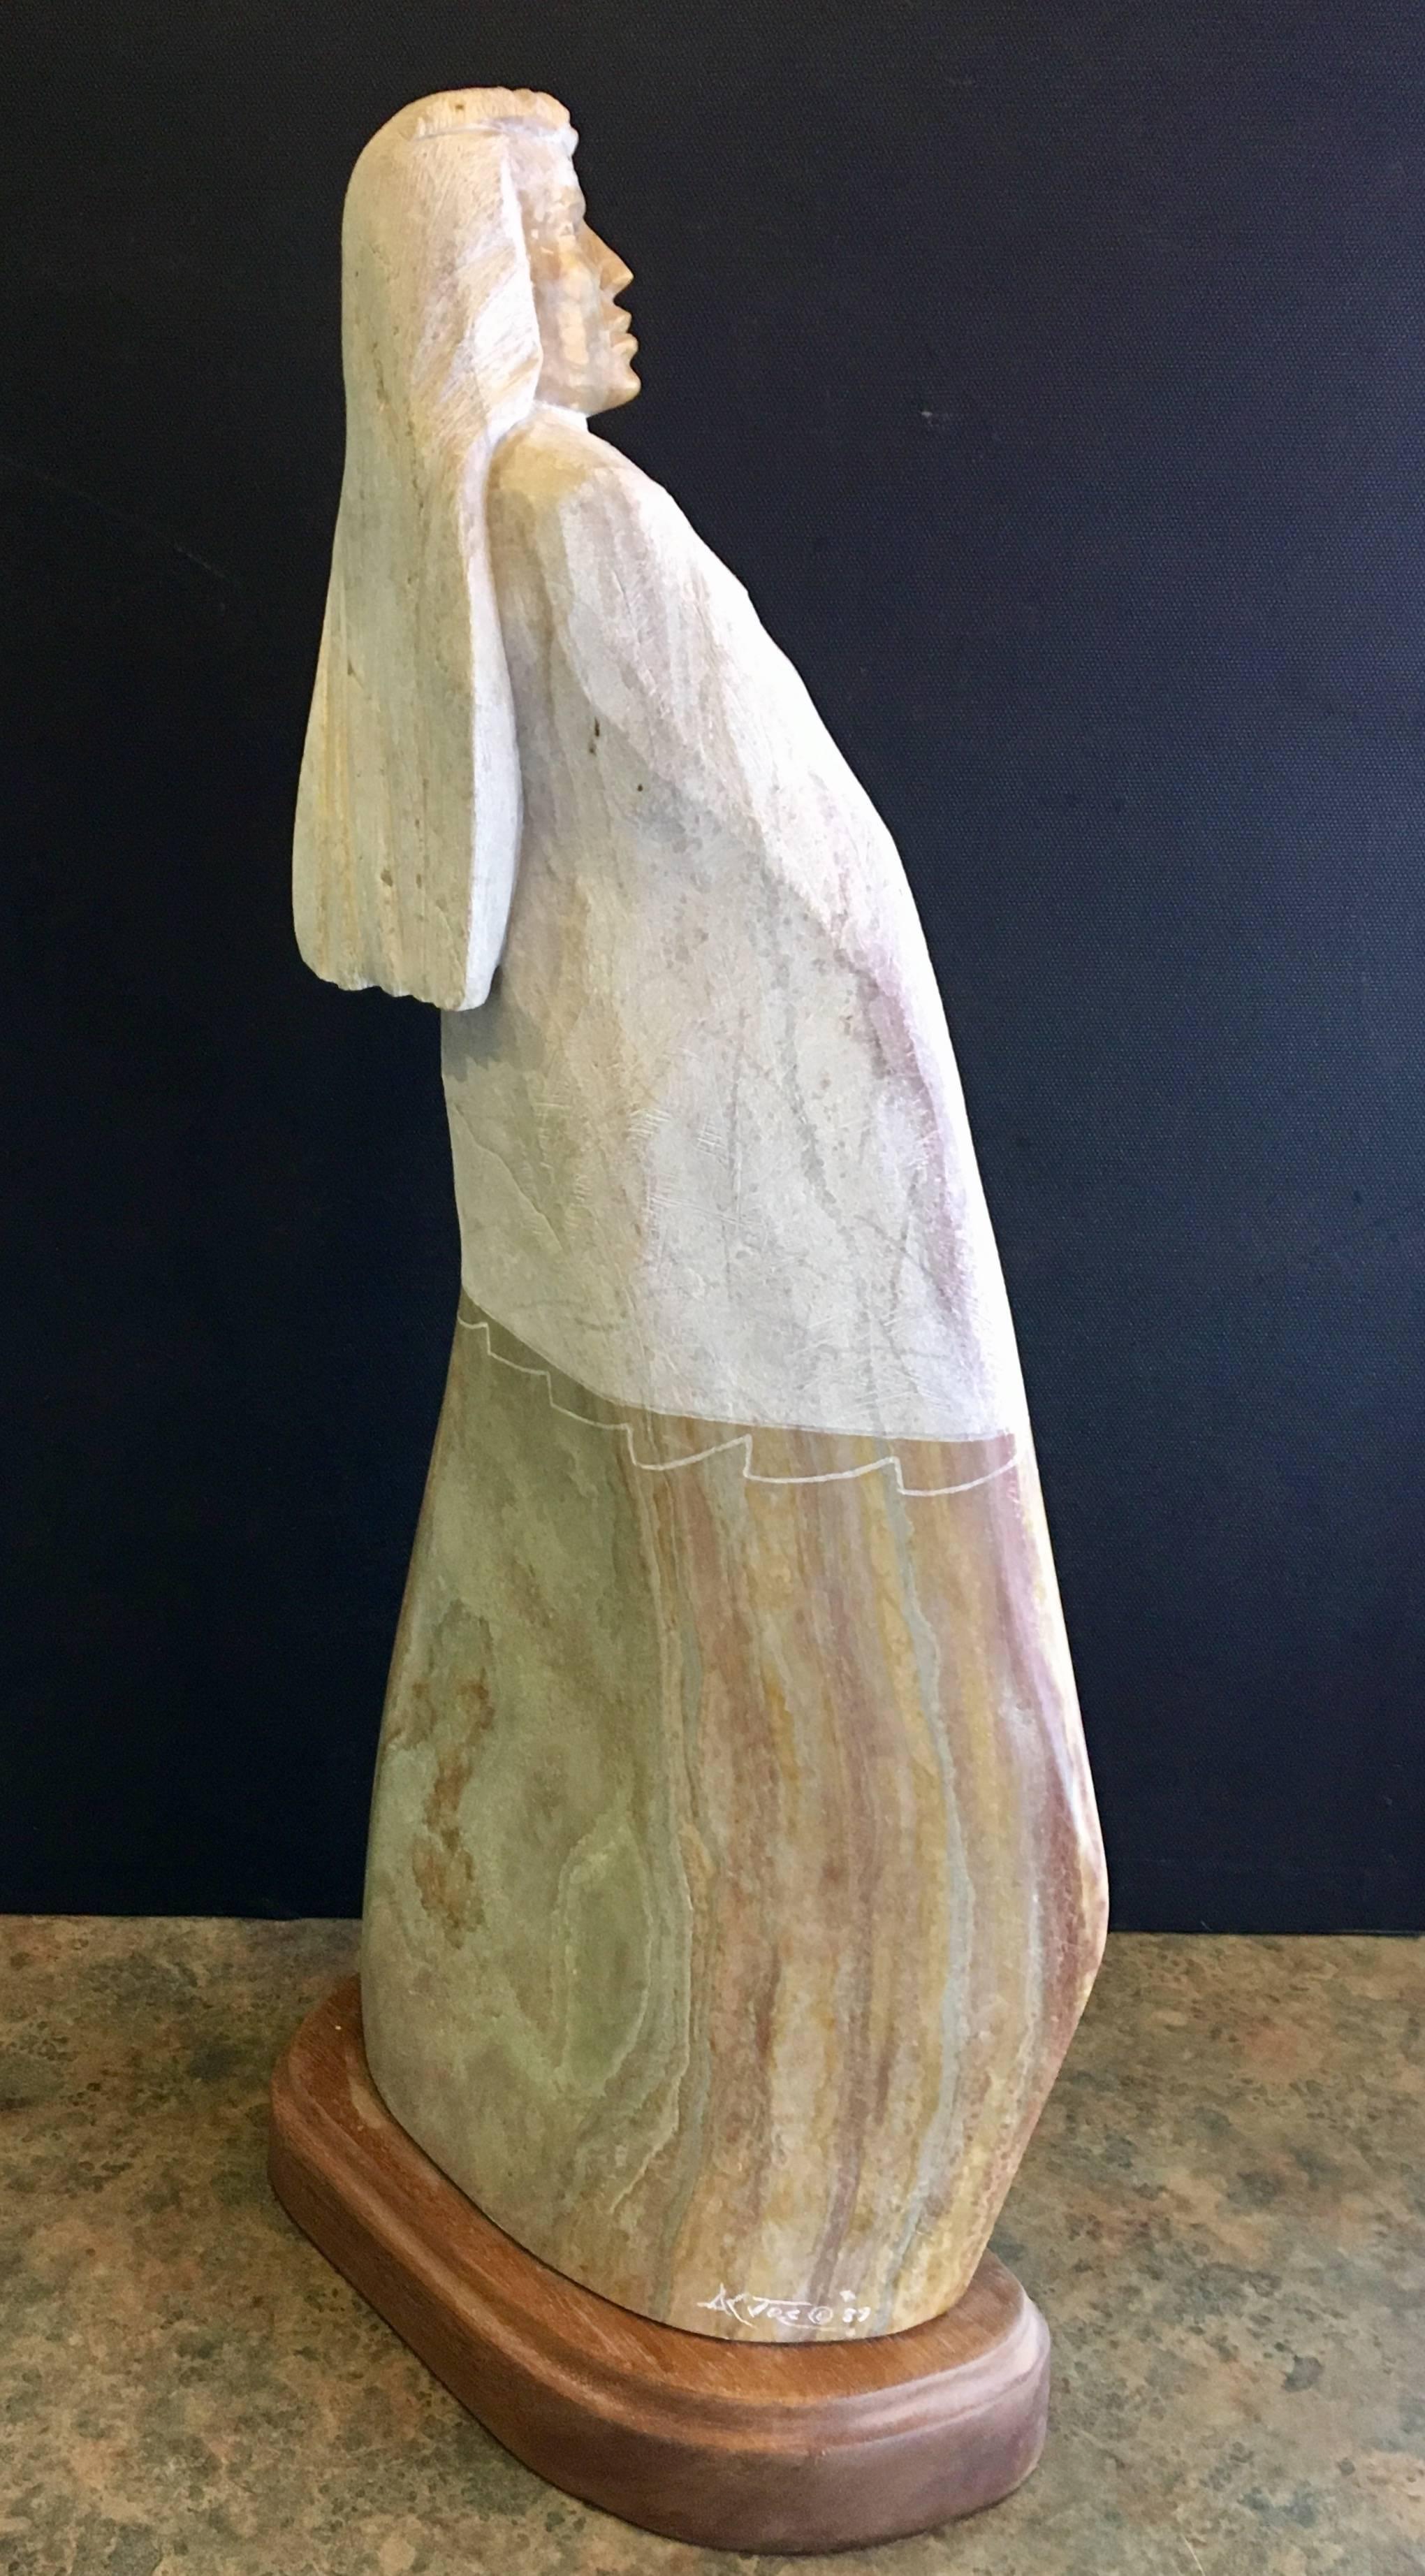 Impressive sculpture of an American Indian carved from Utah alabaster by acclaimed Ute/Navajo artist Oreland C. Joe. The piece is absolutely stunning and would make an excellent addition to any collection. The statue is 25" tall and sits on a